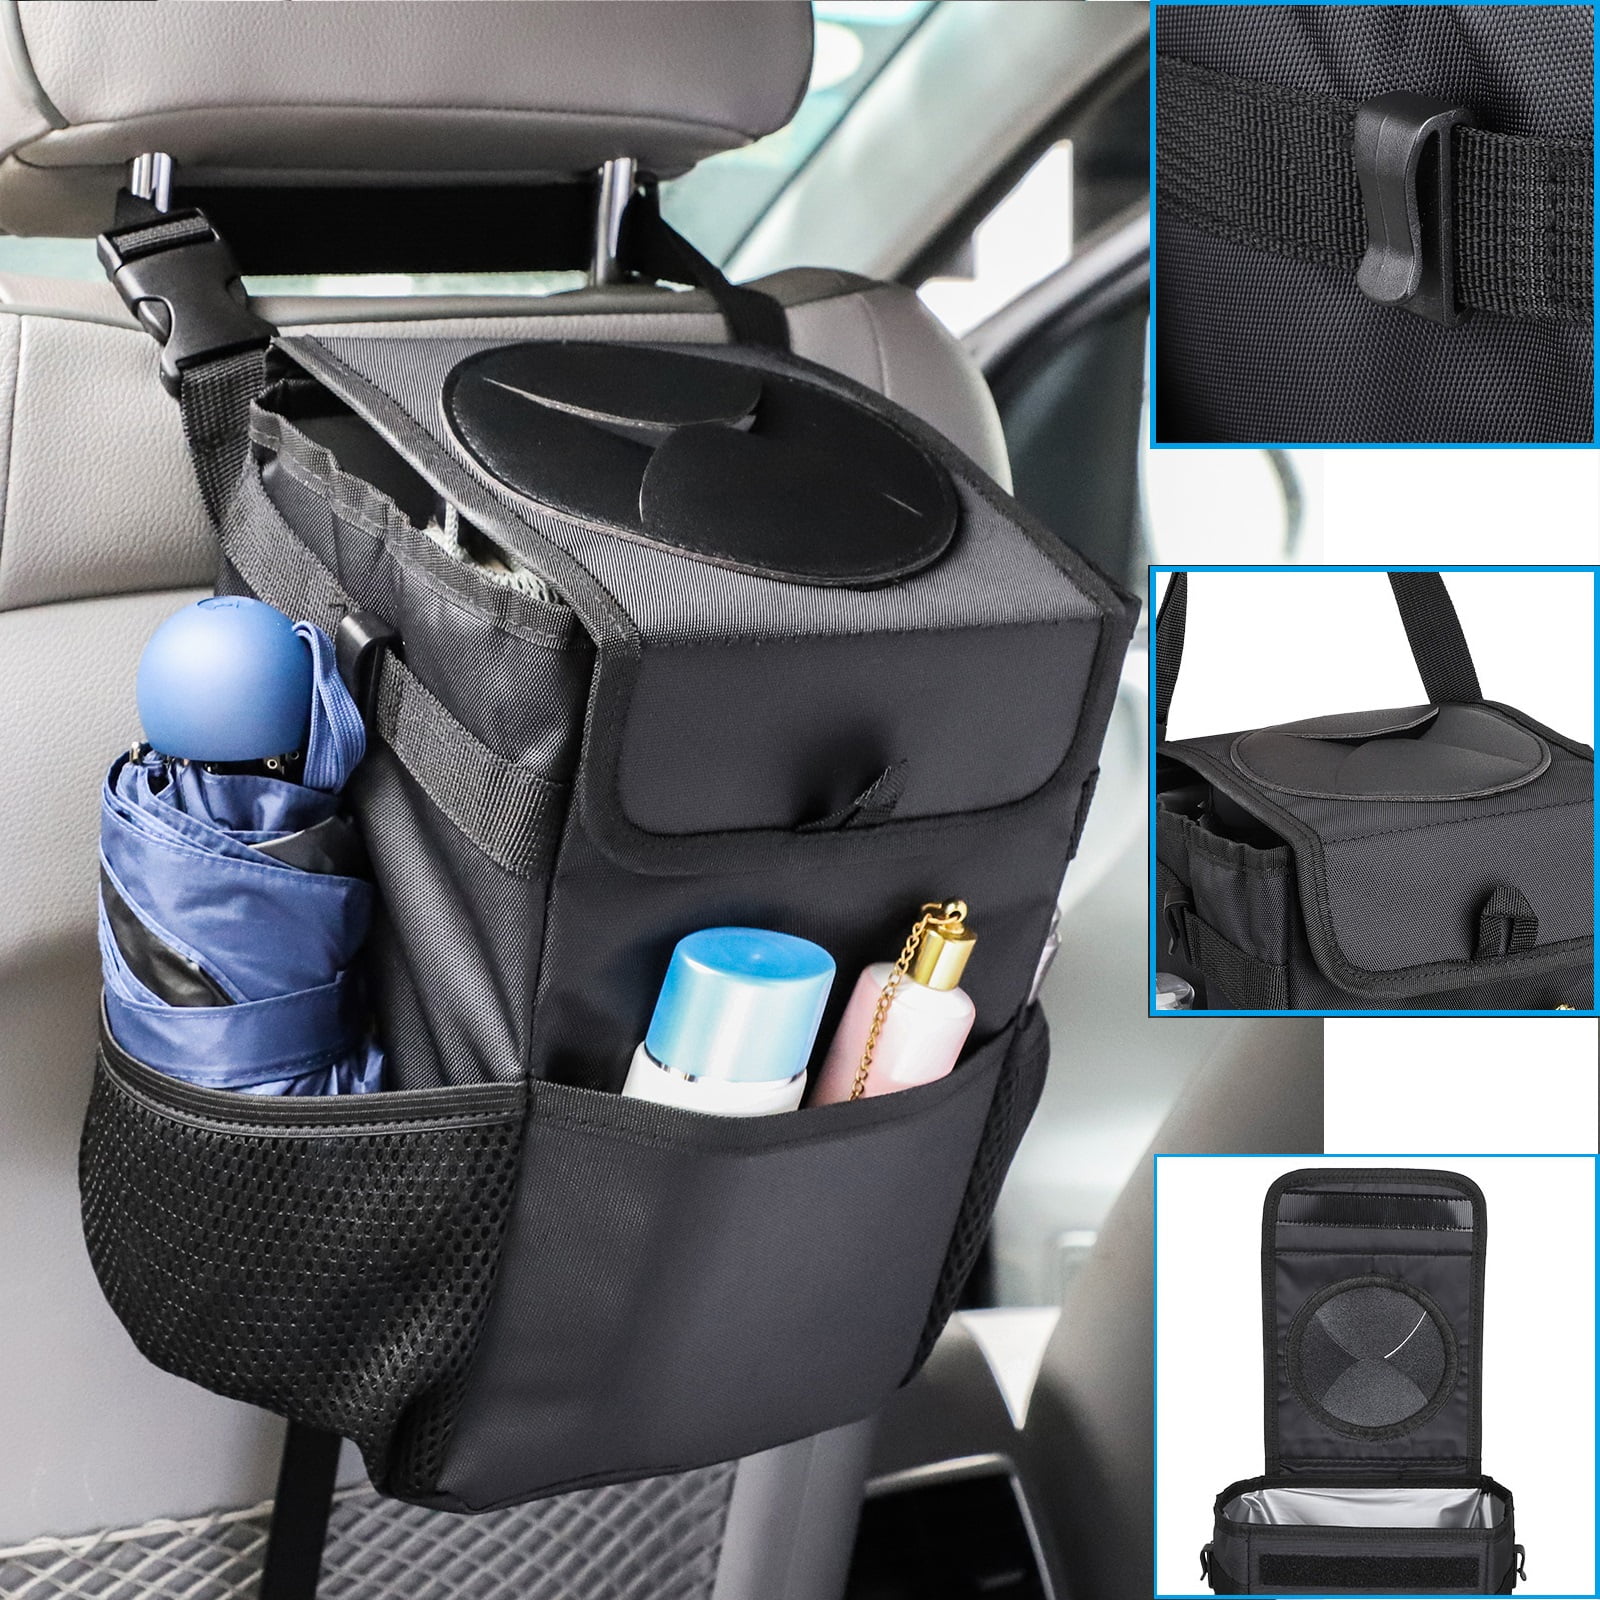 Hanging Car Trash Can with Storage Pockets, Waterproof Leakproof Oxford  Auto Garbage Bag, Vehicle Multi-Use Organizer for Outdoor Traveling,  Foldable